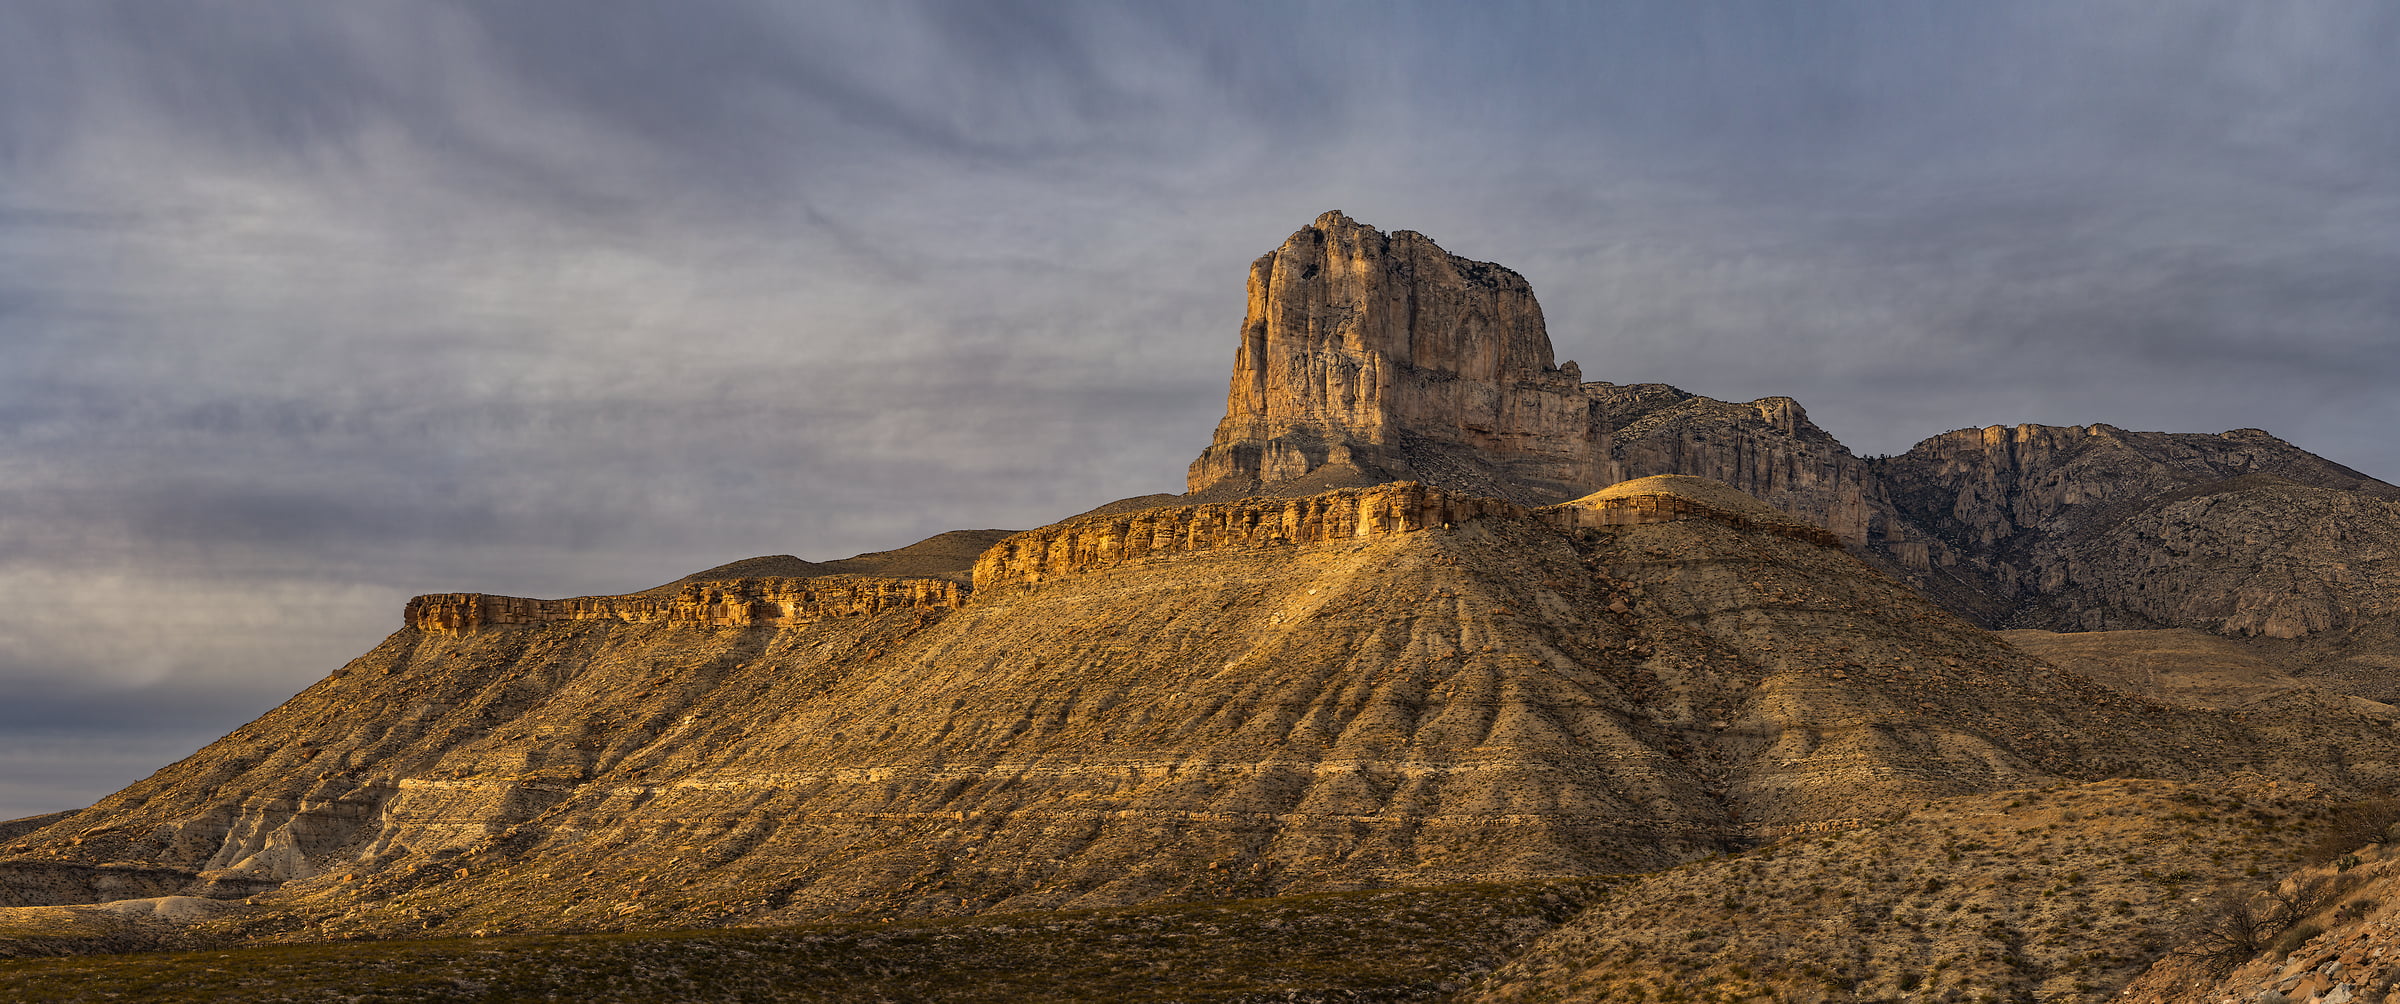 582 megapixels! A very high resolution, large-format VAST photo print of El Capitan in Guadalupe Mountains National Park; landscape photograph created by Chris Blake